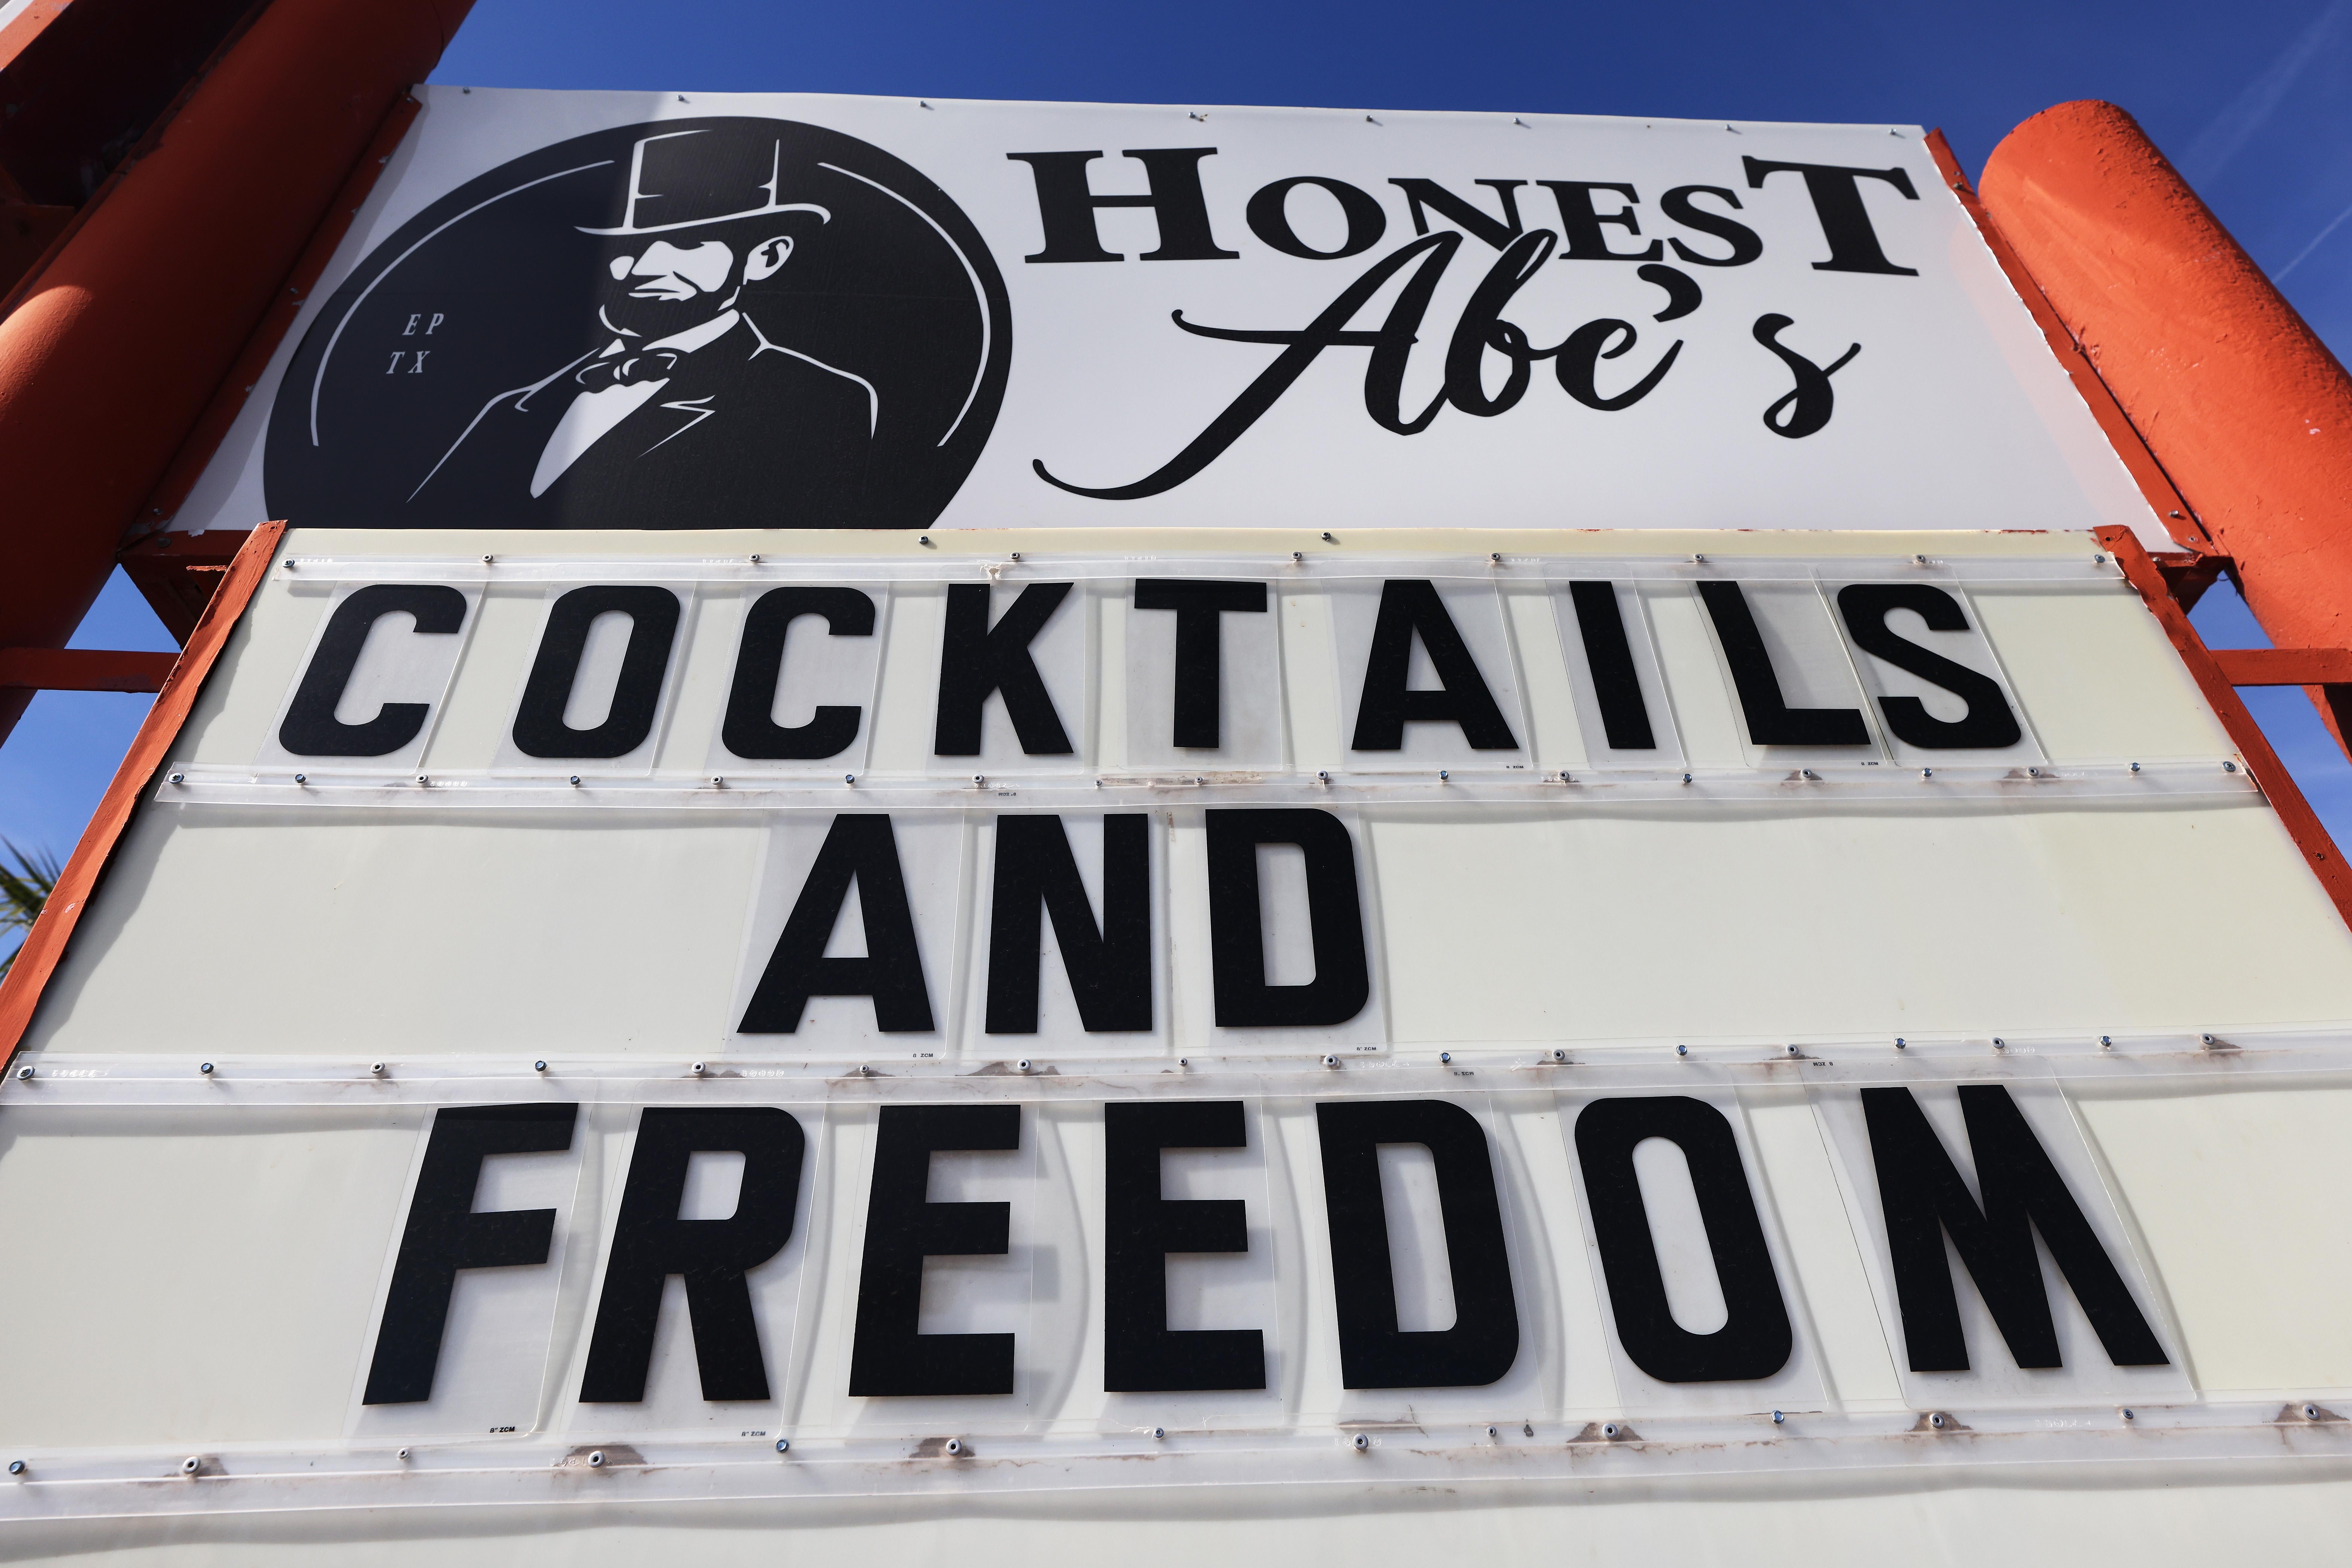 Marquee outside Honest Abe's bar that says "Cocktails and Freedom."